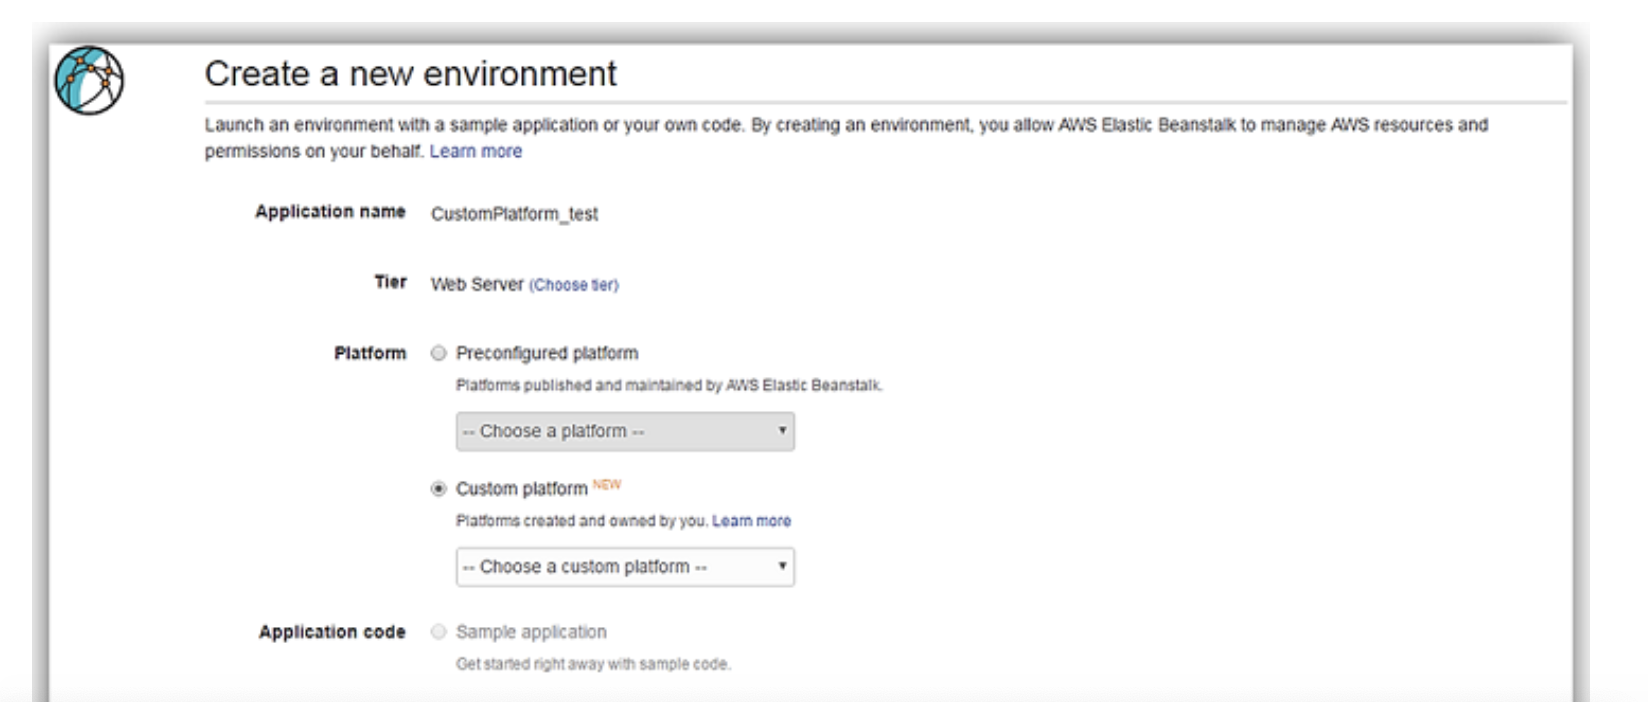 Create a new environment

Launch an environment with a sample application or your own code, By creating an environment, you allow AWS Ekastic Beanstalk to manage AWS resources and
permissions on your behalf. Learn more

Application name — CustomPiatform_test
Tier Web Server (Choose ser)

Platform © Preconfigured platform

Piatforms published and maintained by AWS Elastic Beanstalk

|-Choose a platform — ,

© Custom platform "="
Platforms created and owned by you, Leam more
== Choose a custom platform -- v

Application code Sample appication
Get stamed night away with sample code.